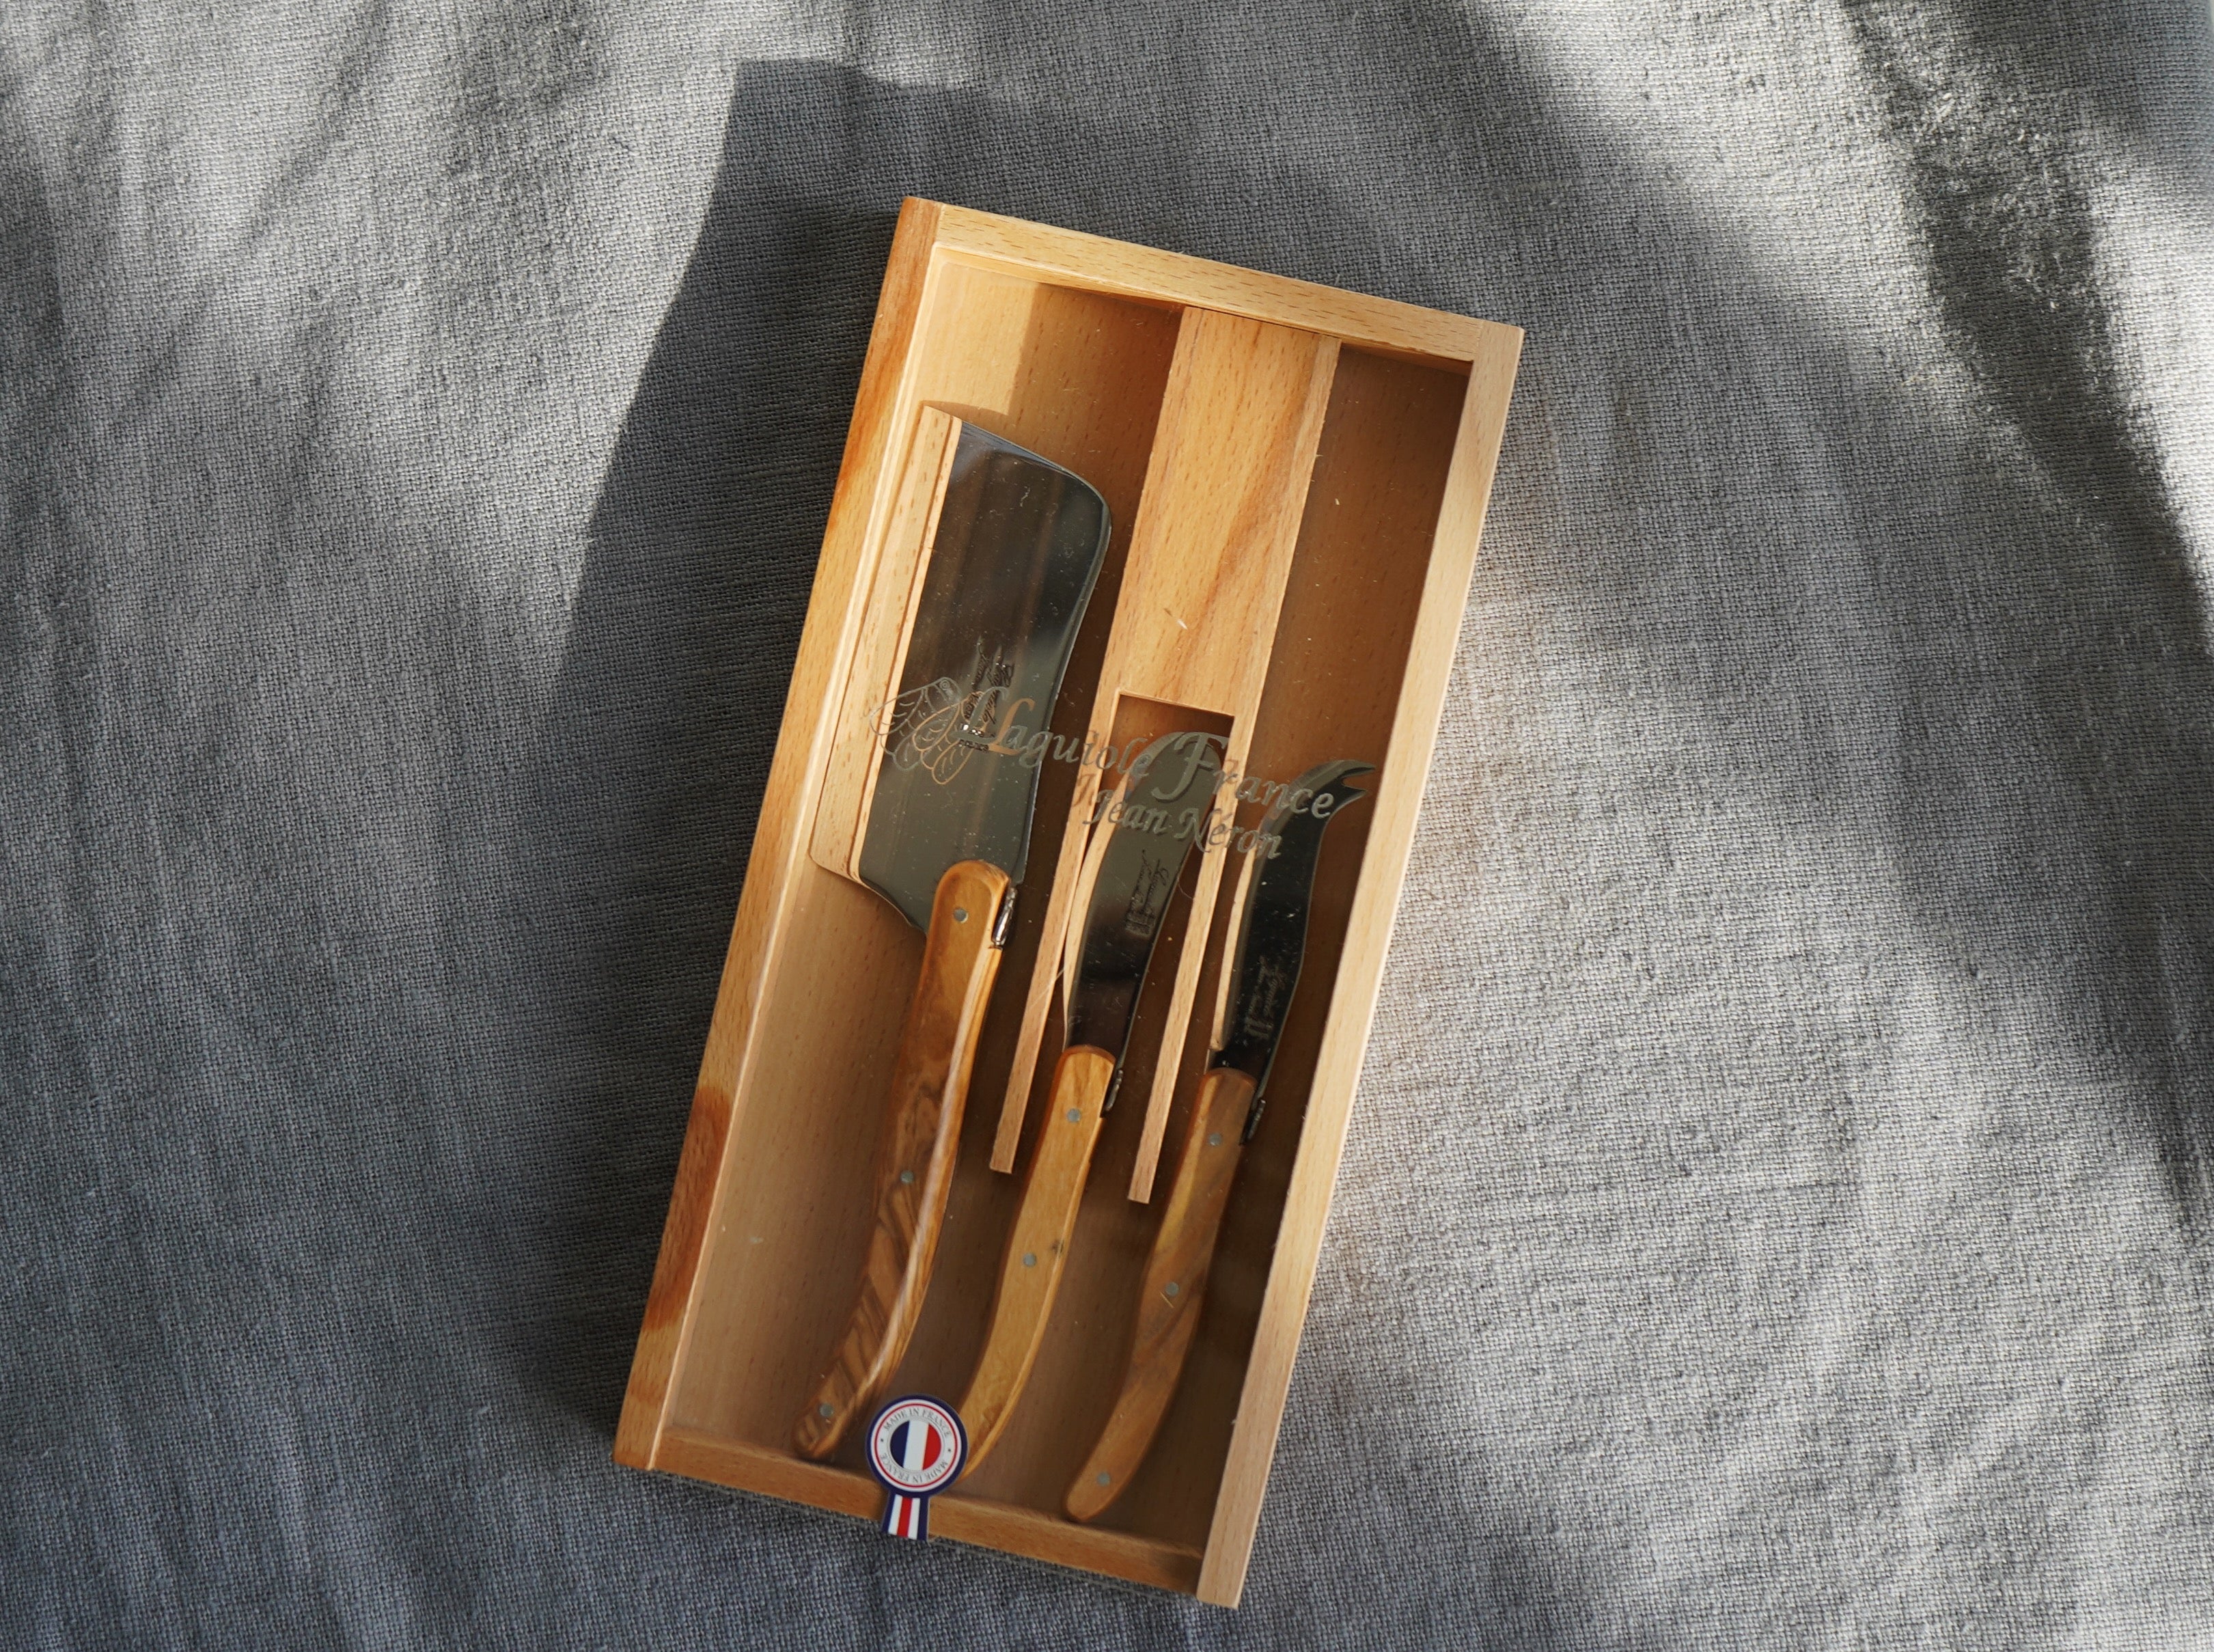 Laguiole Olivewood Large Cheese Set in Wood Box with Acrylic Lid (Set of 3) Cutlery Set Laguiole Brand_Laguiole Kitchen_Dinnerware Kitchen_Serveware Knife Sets Laguiole New Arrivals Spring Collection 4551BC25-ED08-49A3-8962-C5F5C6EB36E5